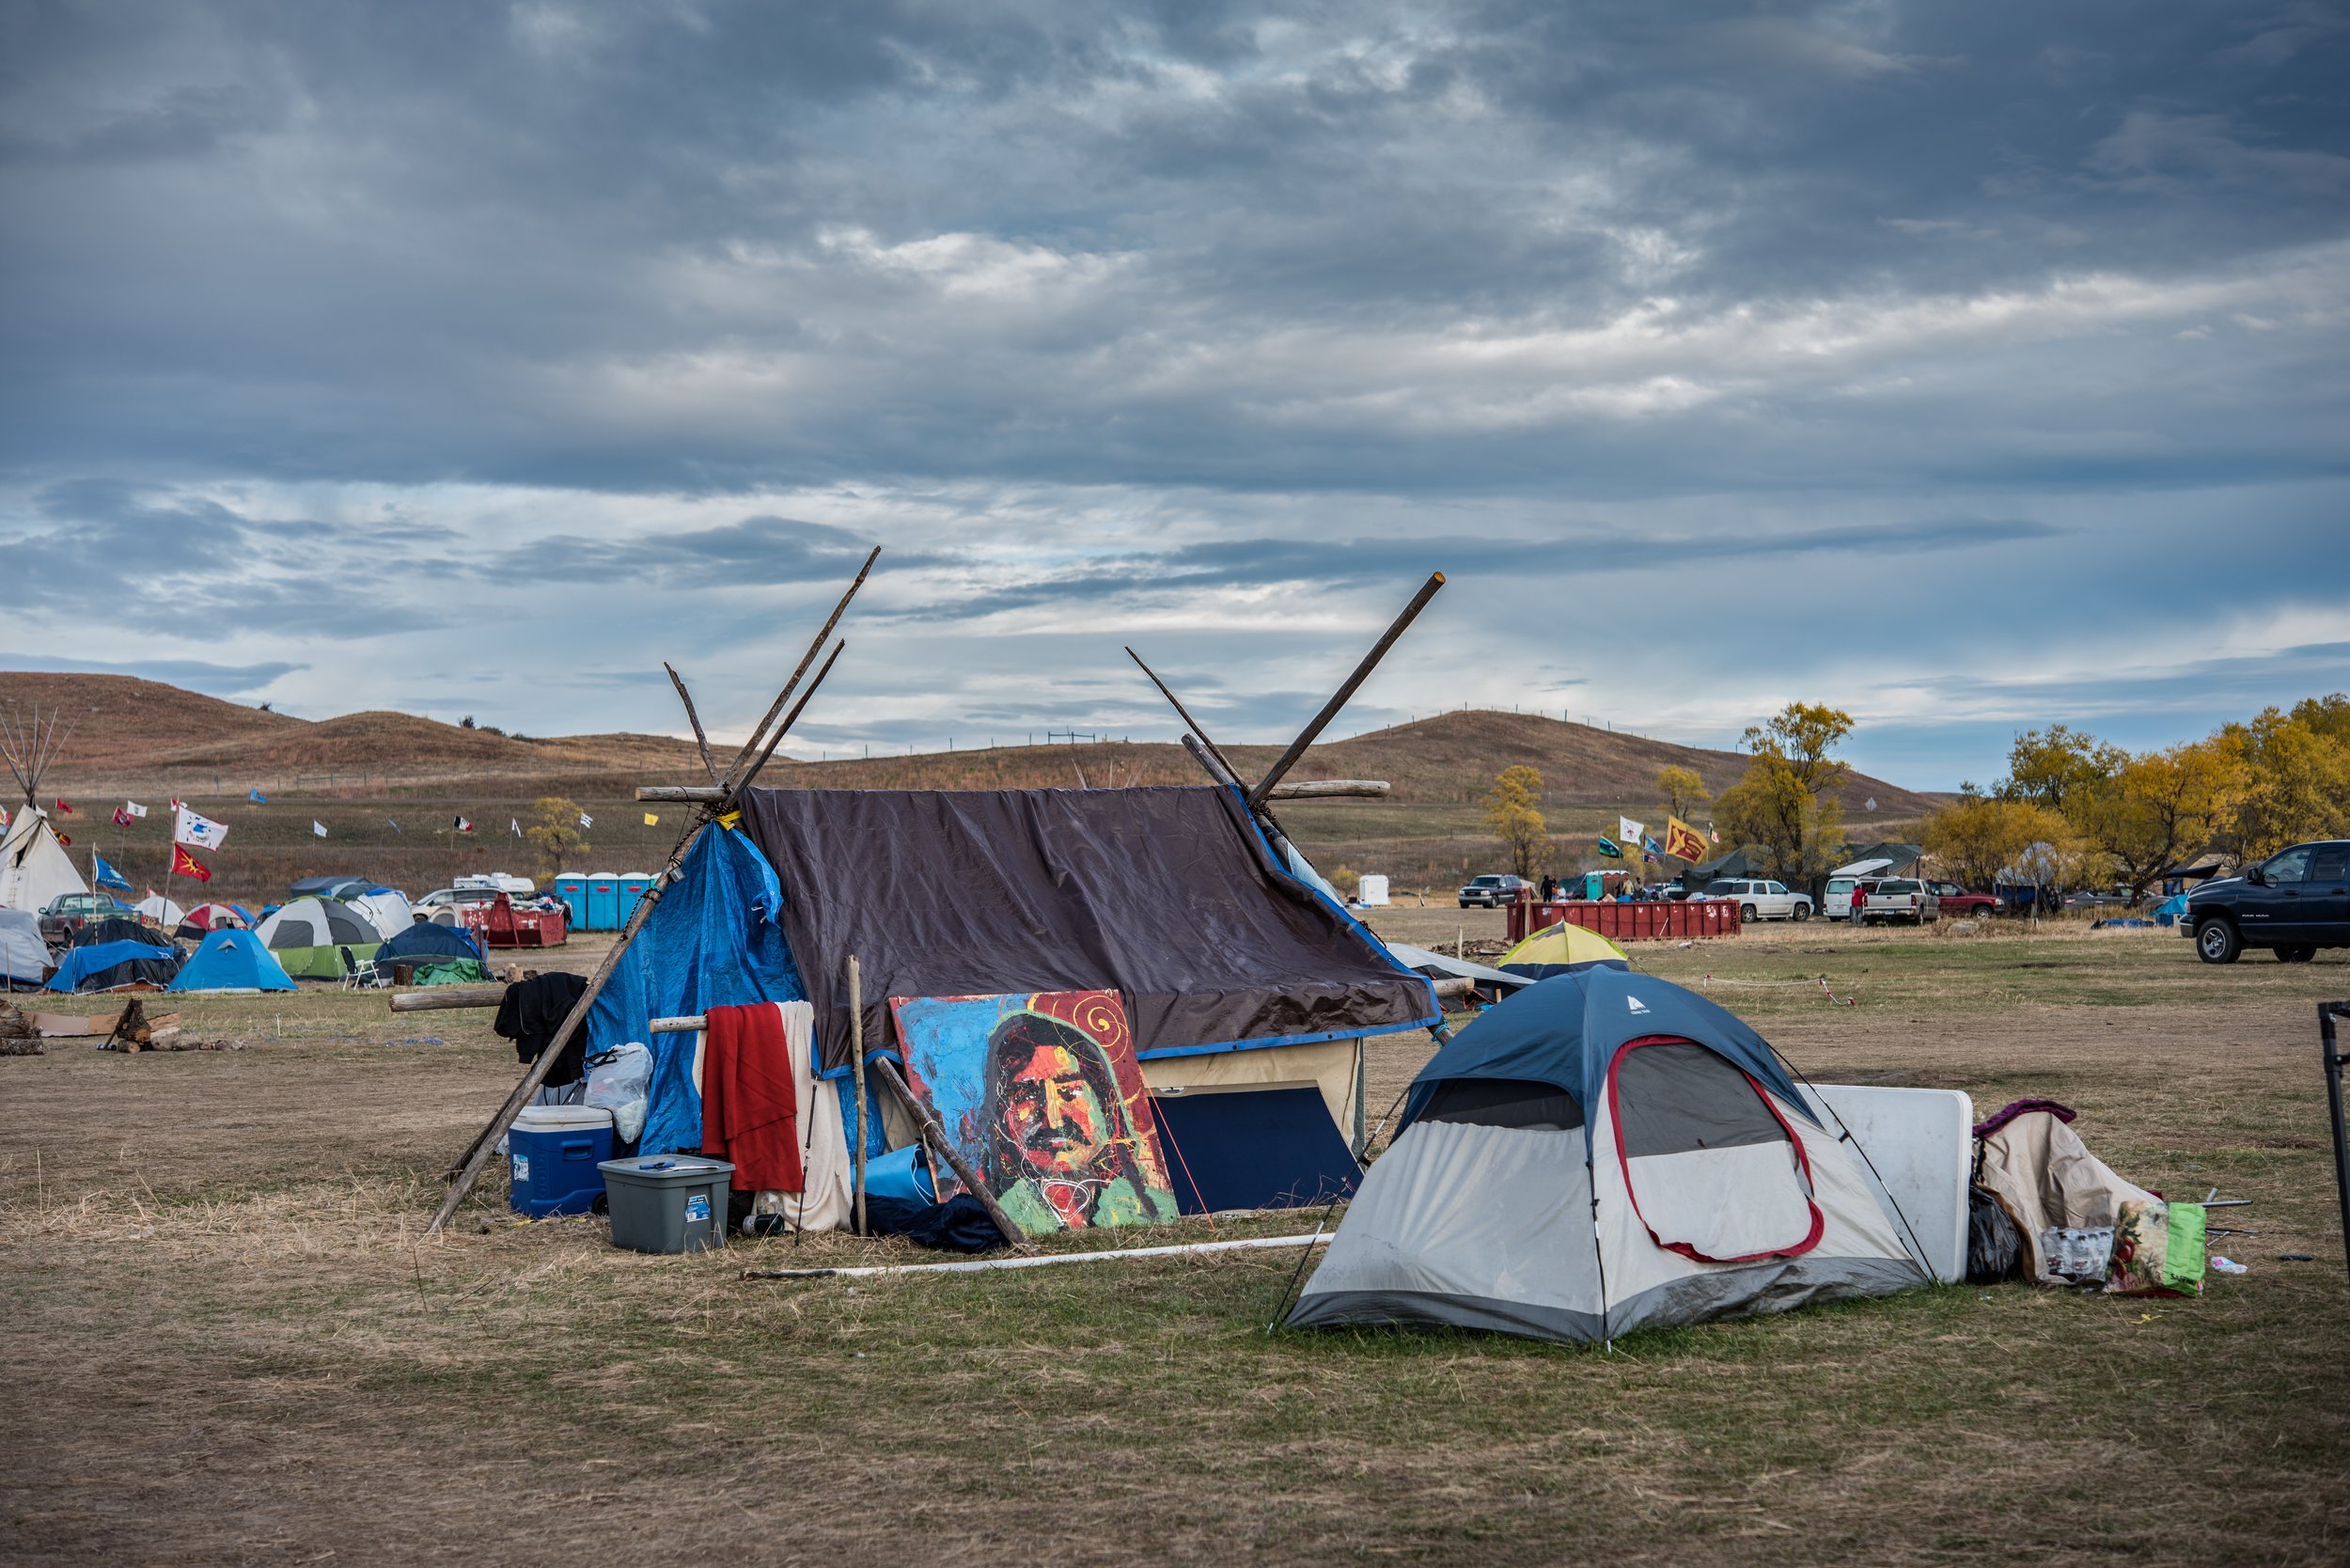  Within the Octeti Sakowin encampment there was a diversity in the structures people erected. 